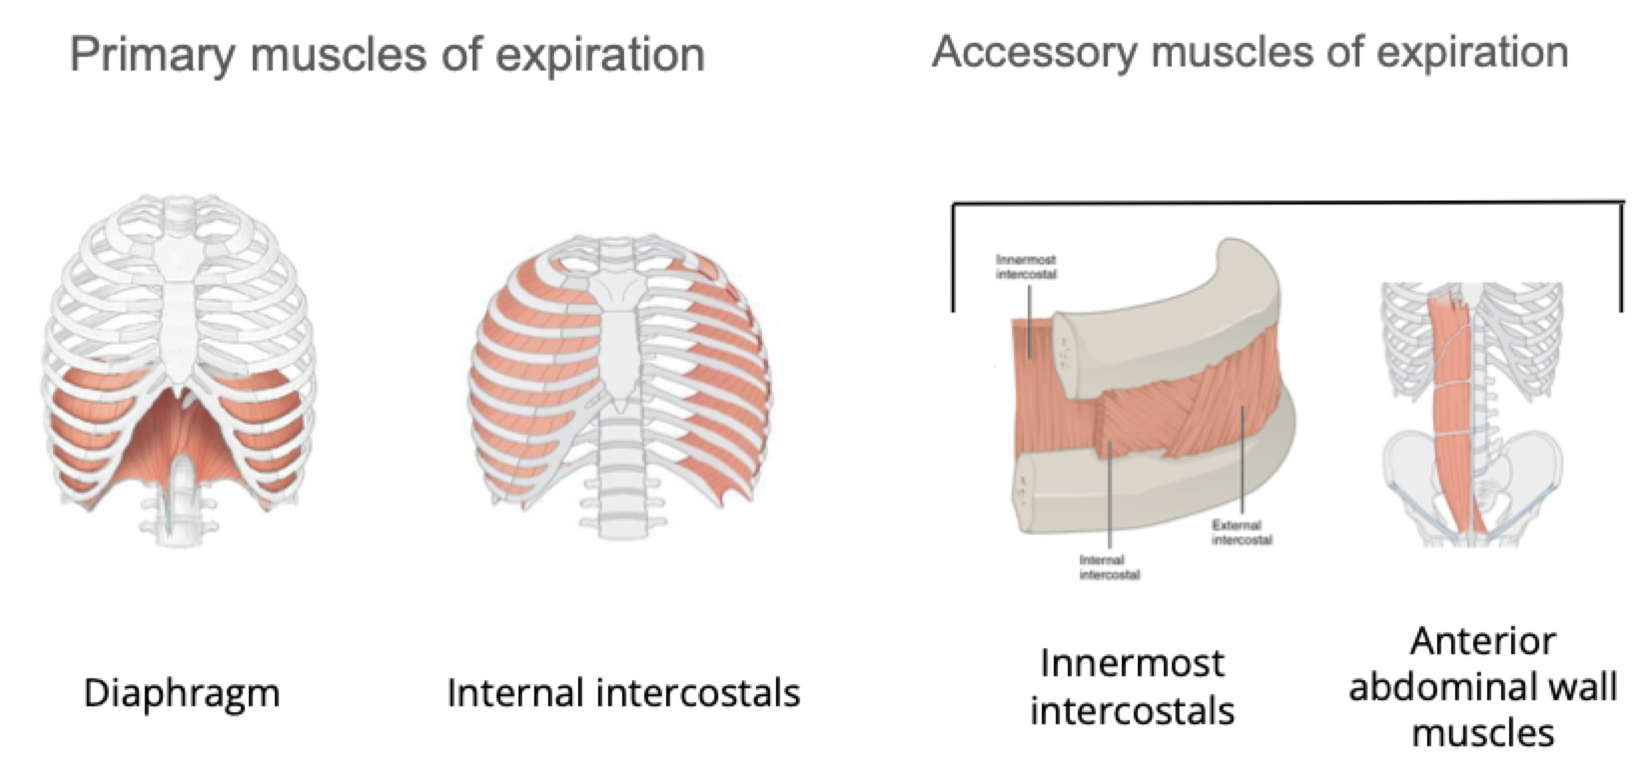 <p><strong>Primary muscles of expiration</strong>: Diaphragm, Internal intercostals Innermost intercostals</p><p><strong>Accessory muscles of expiration</strong>: Innermost intercostals, Anterior abdominal wall muscles</p>